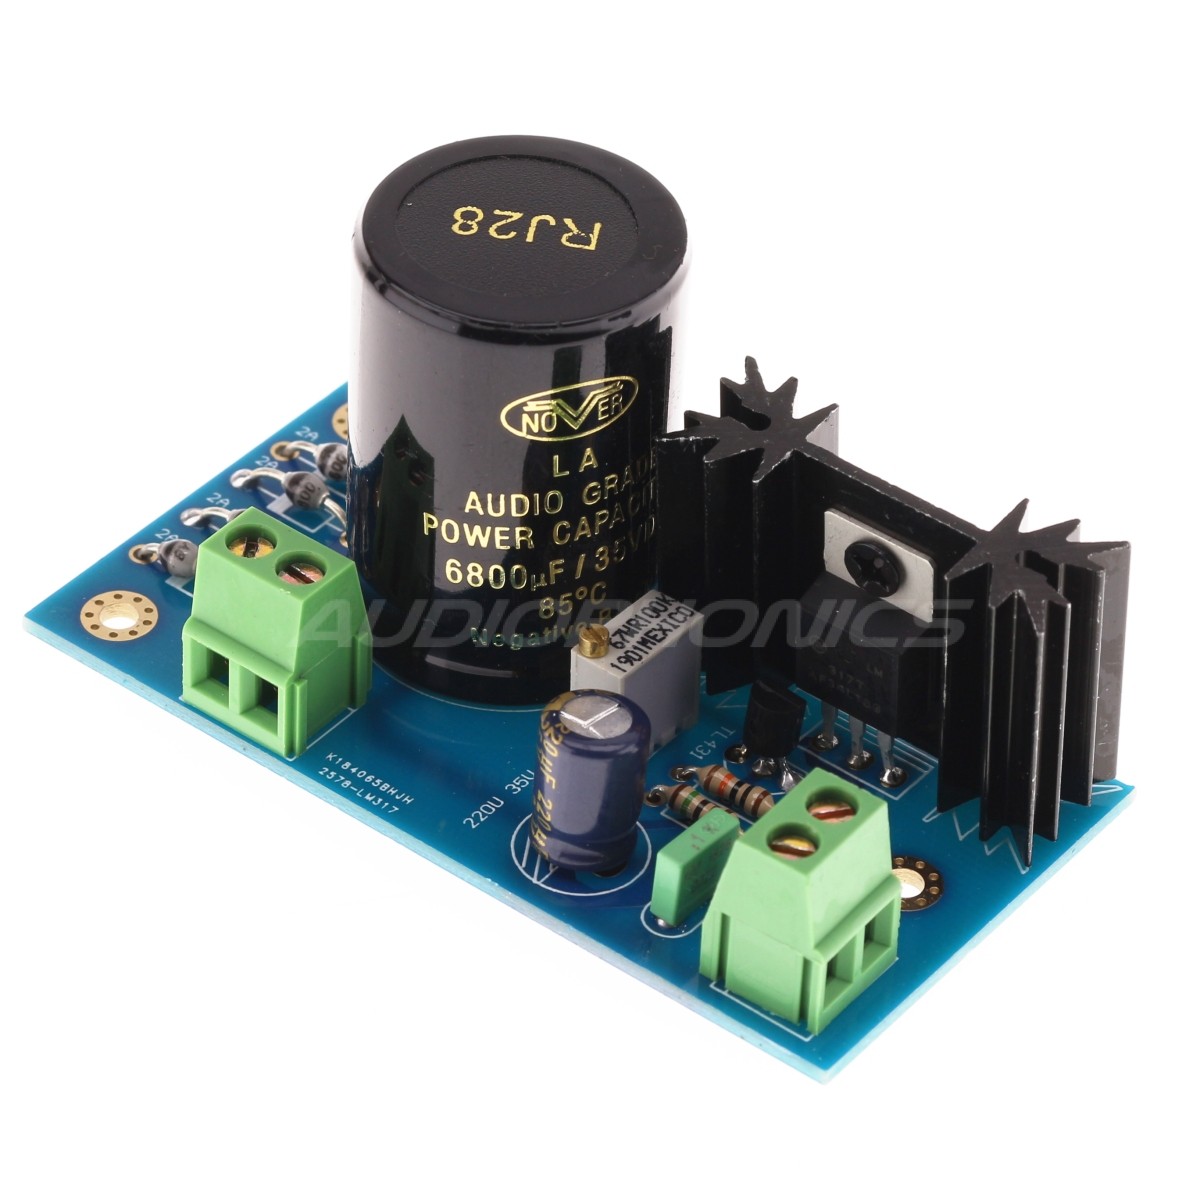 Regulated Linear Power Supply AC-DC LM317 / TL431 24V 1.5A